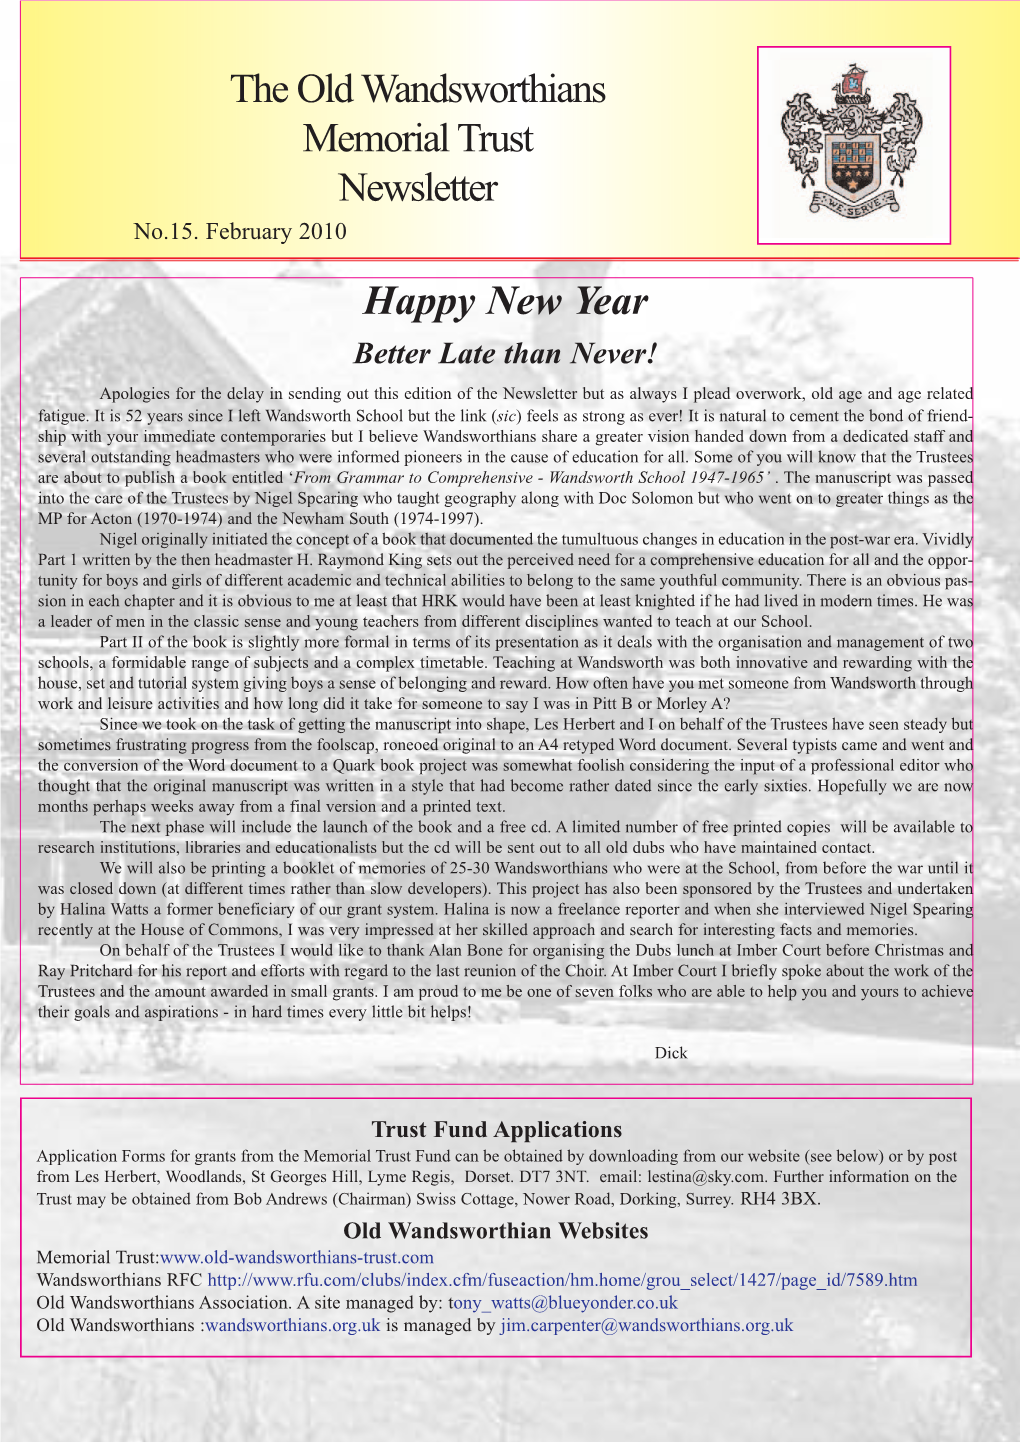 The Old Wandsworthians Memorial Trust Newsletter Happy New Year